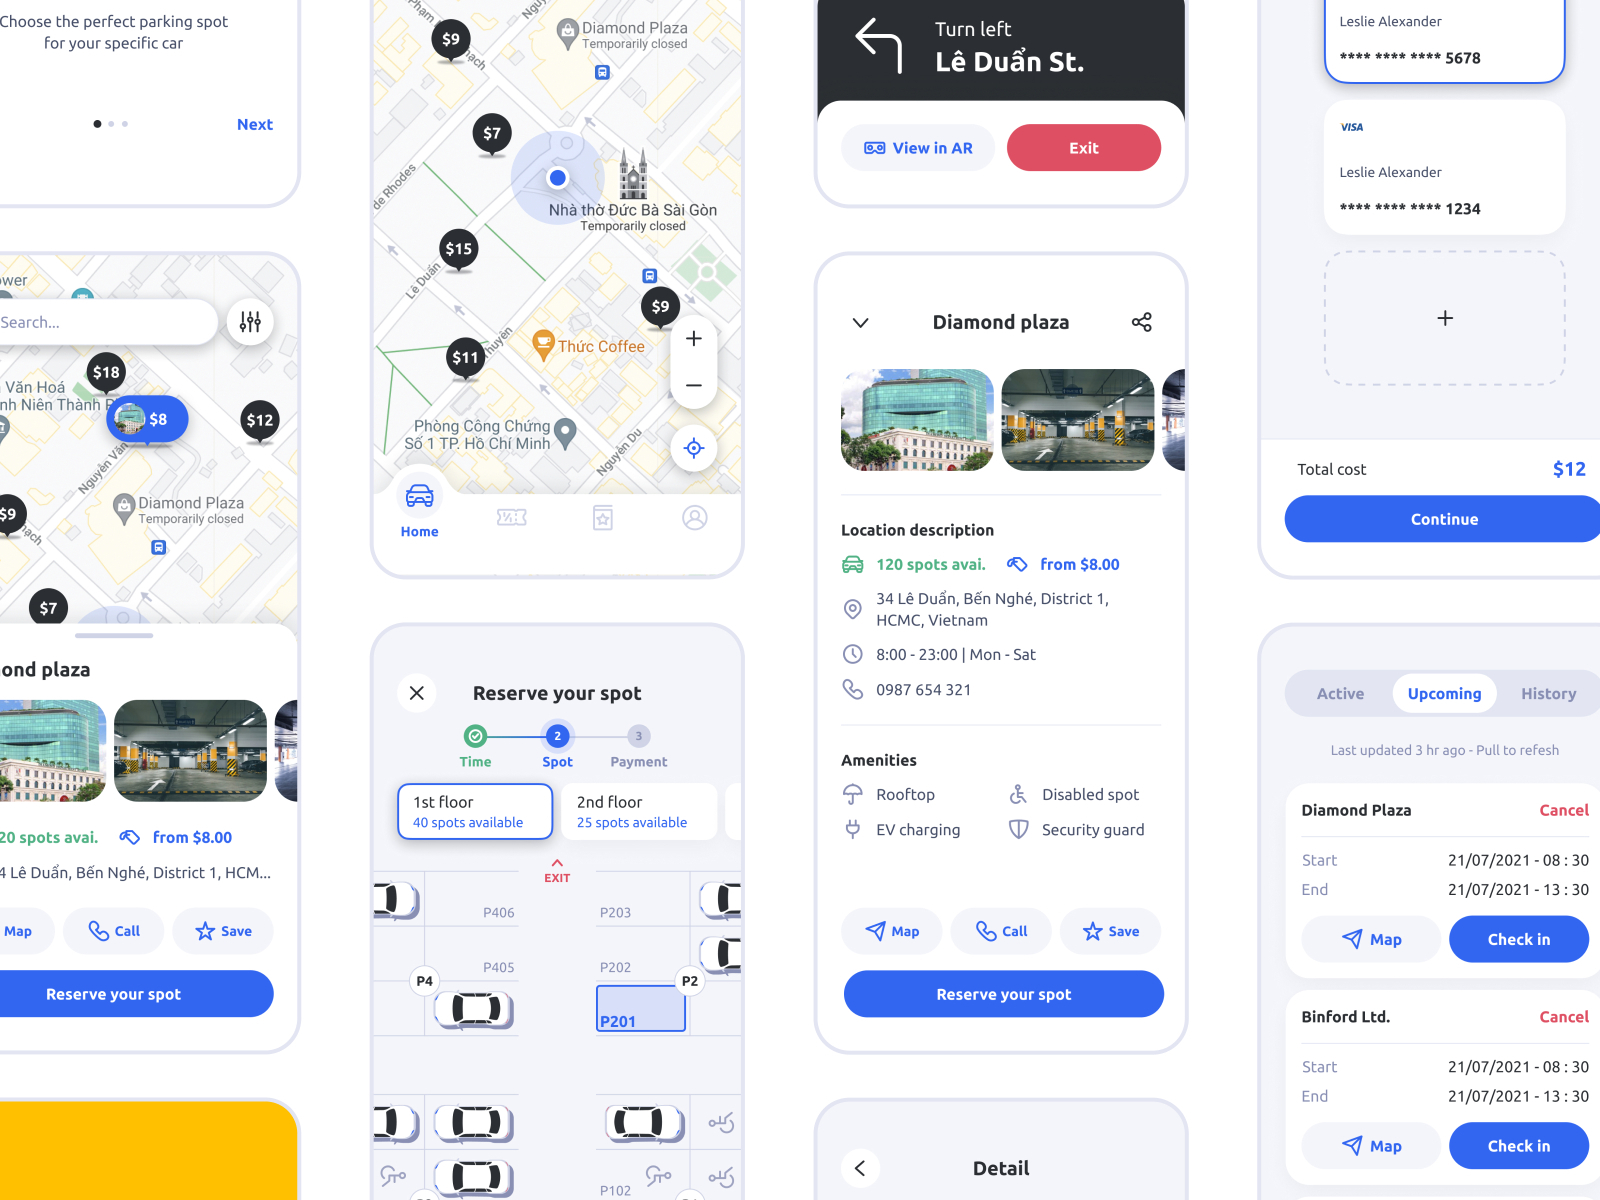 Park your Car Mobile Application by Aurora Phan on Dribbble